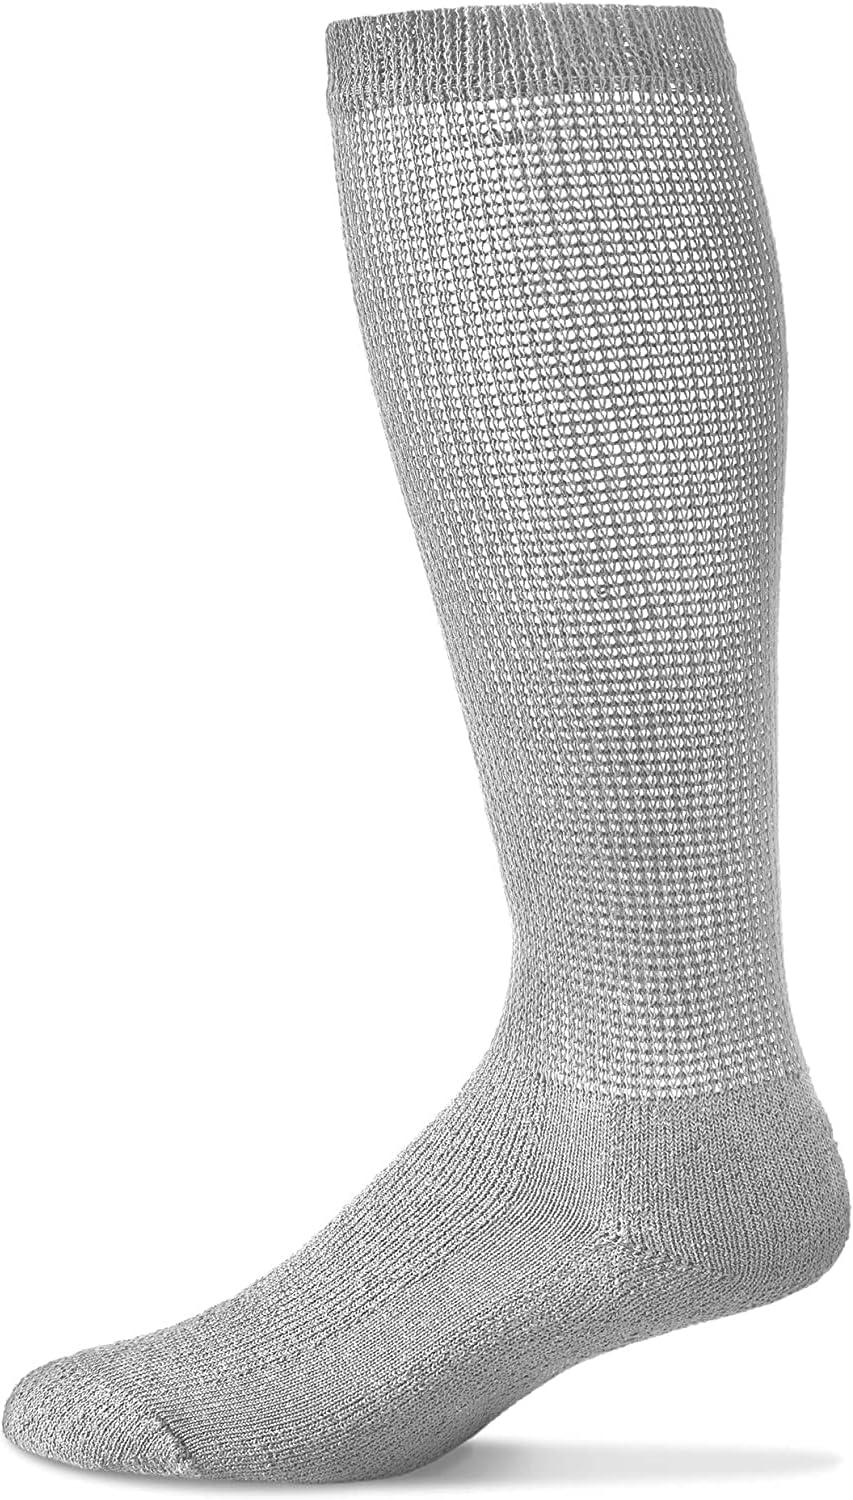 MDR Diabetic Over the Calf Length Crew Socks (12 Pair Pack) Seamless Cotton  Blend Made in USA (Gray 10-13) 10-13 Gray